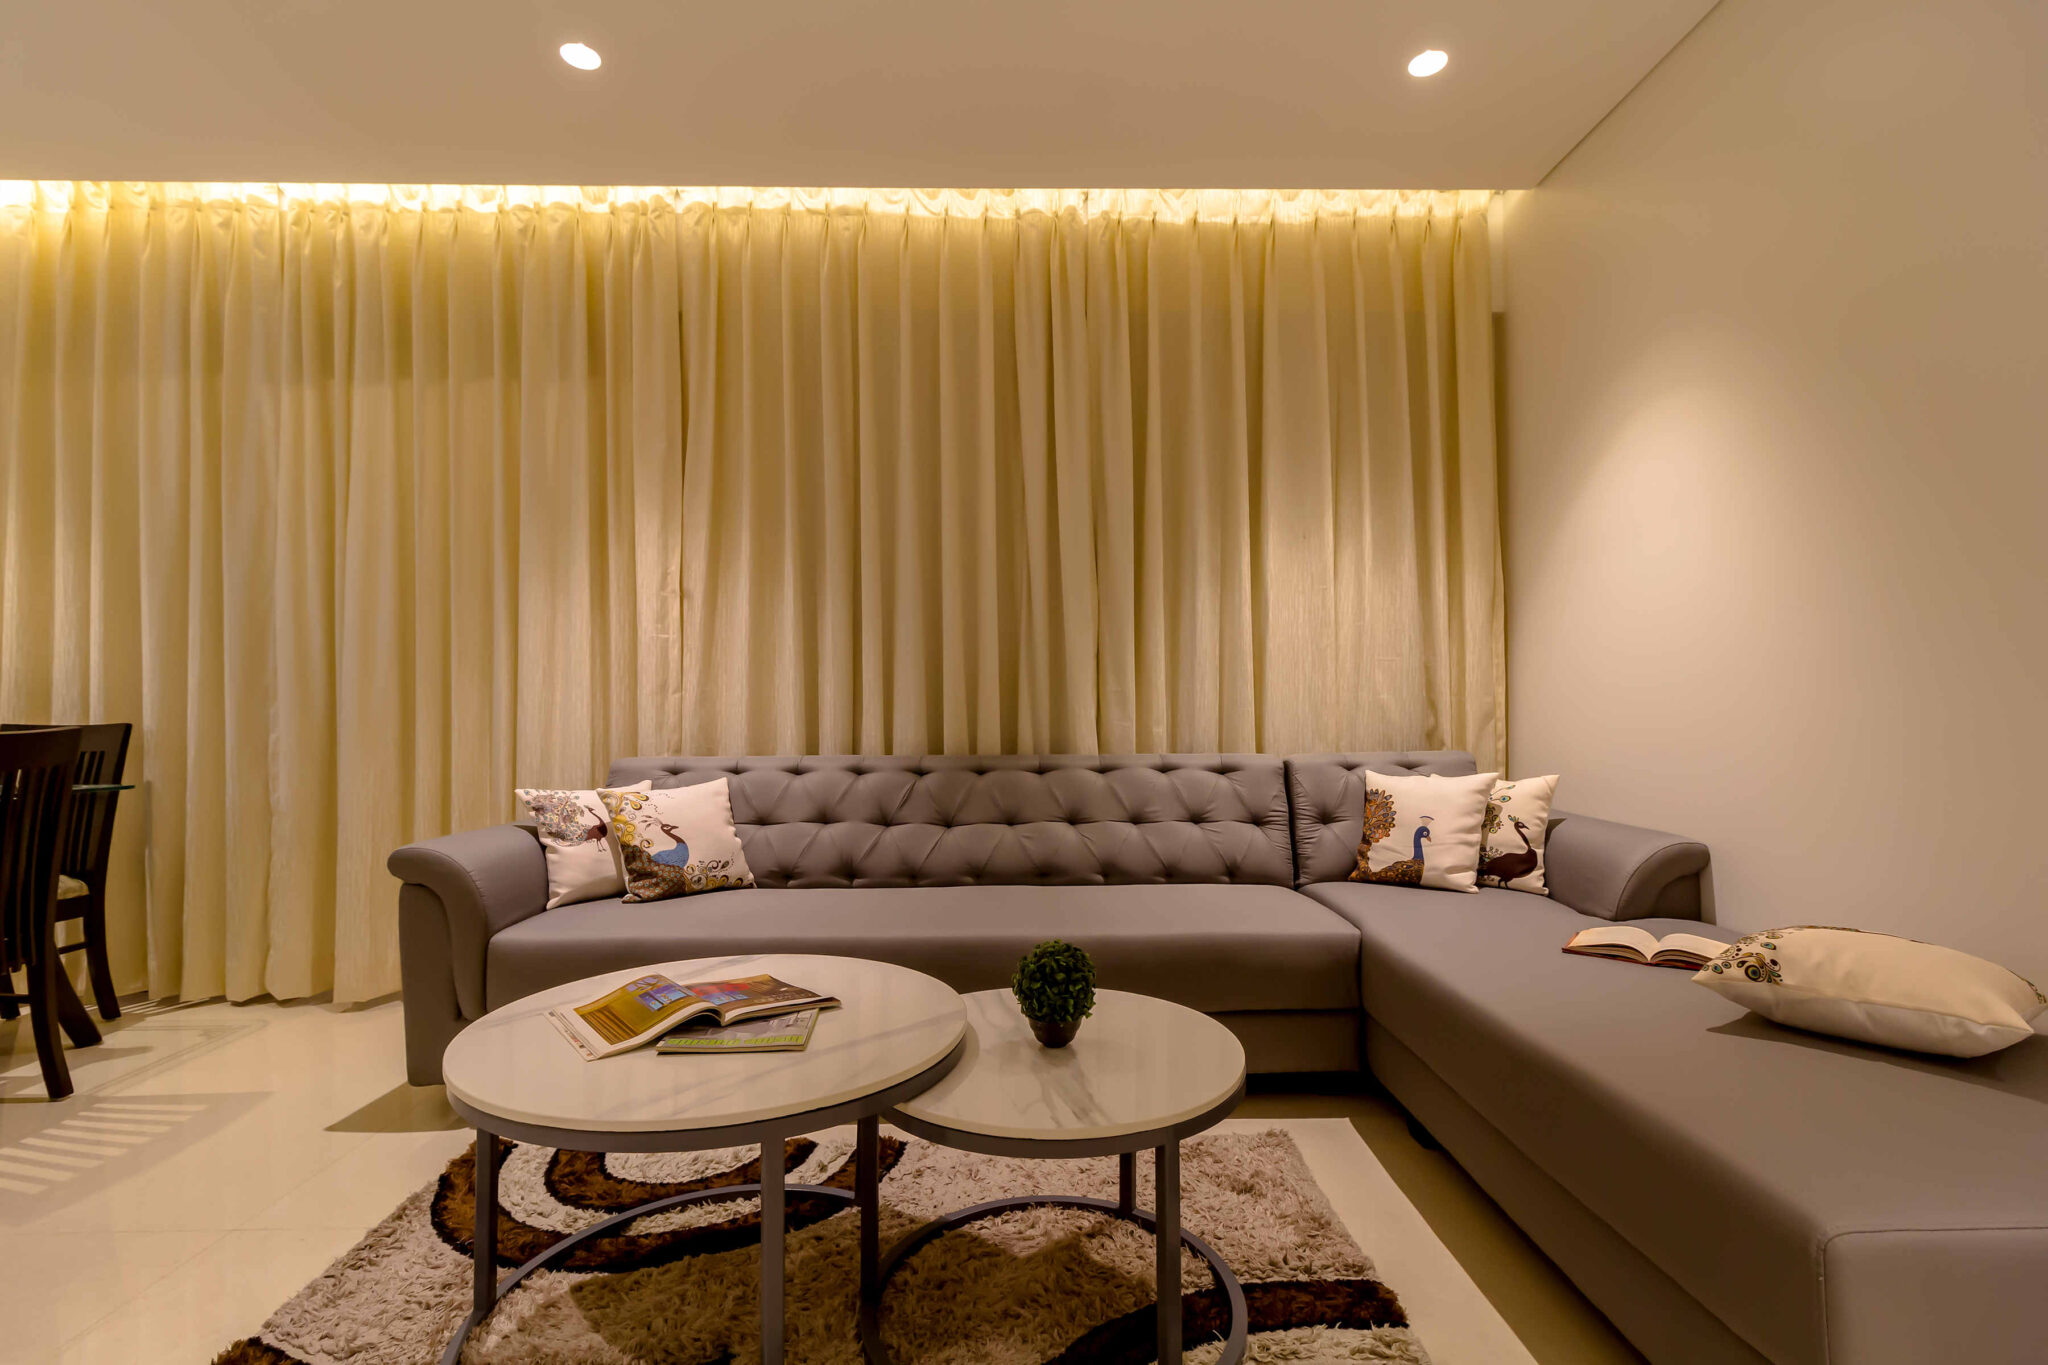 Tips to Select the Best Interior Designer in Pune